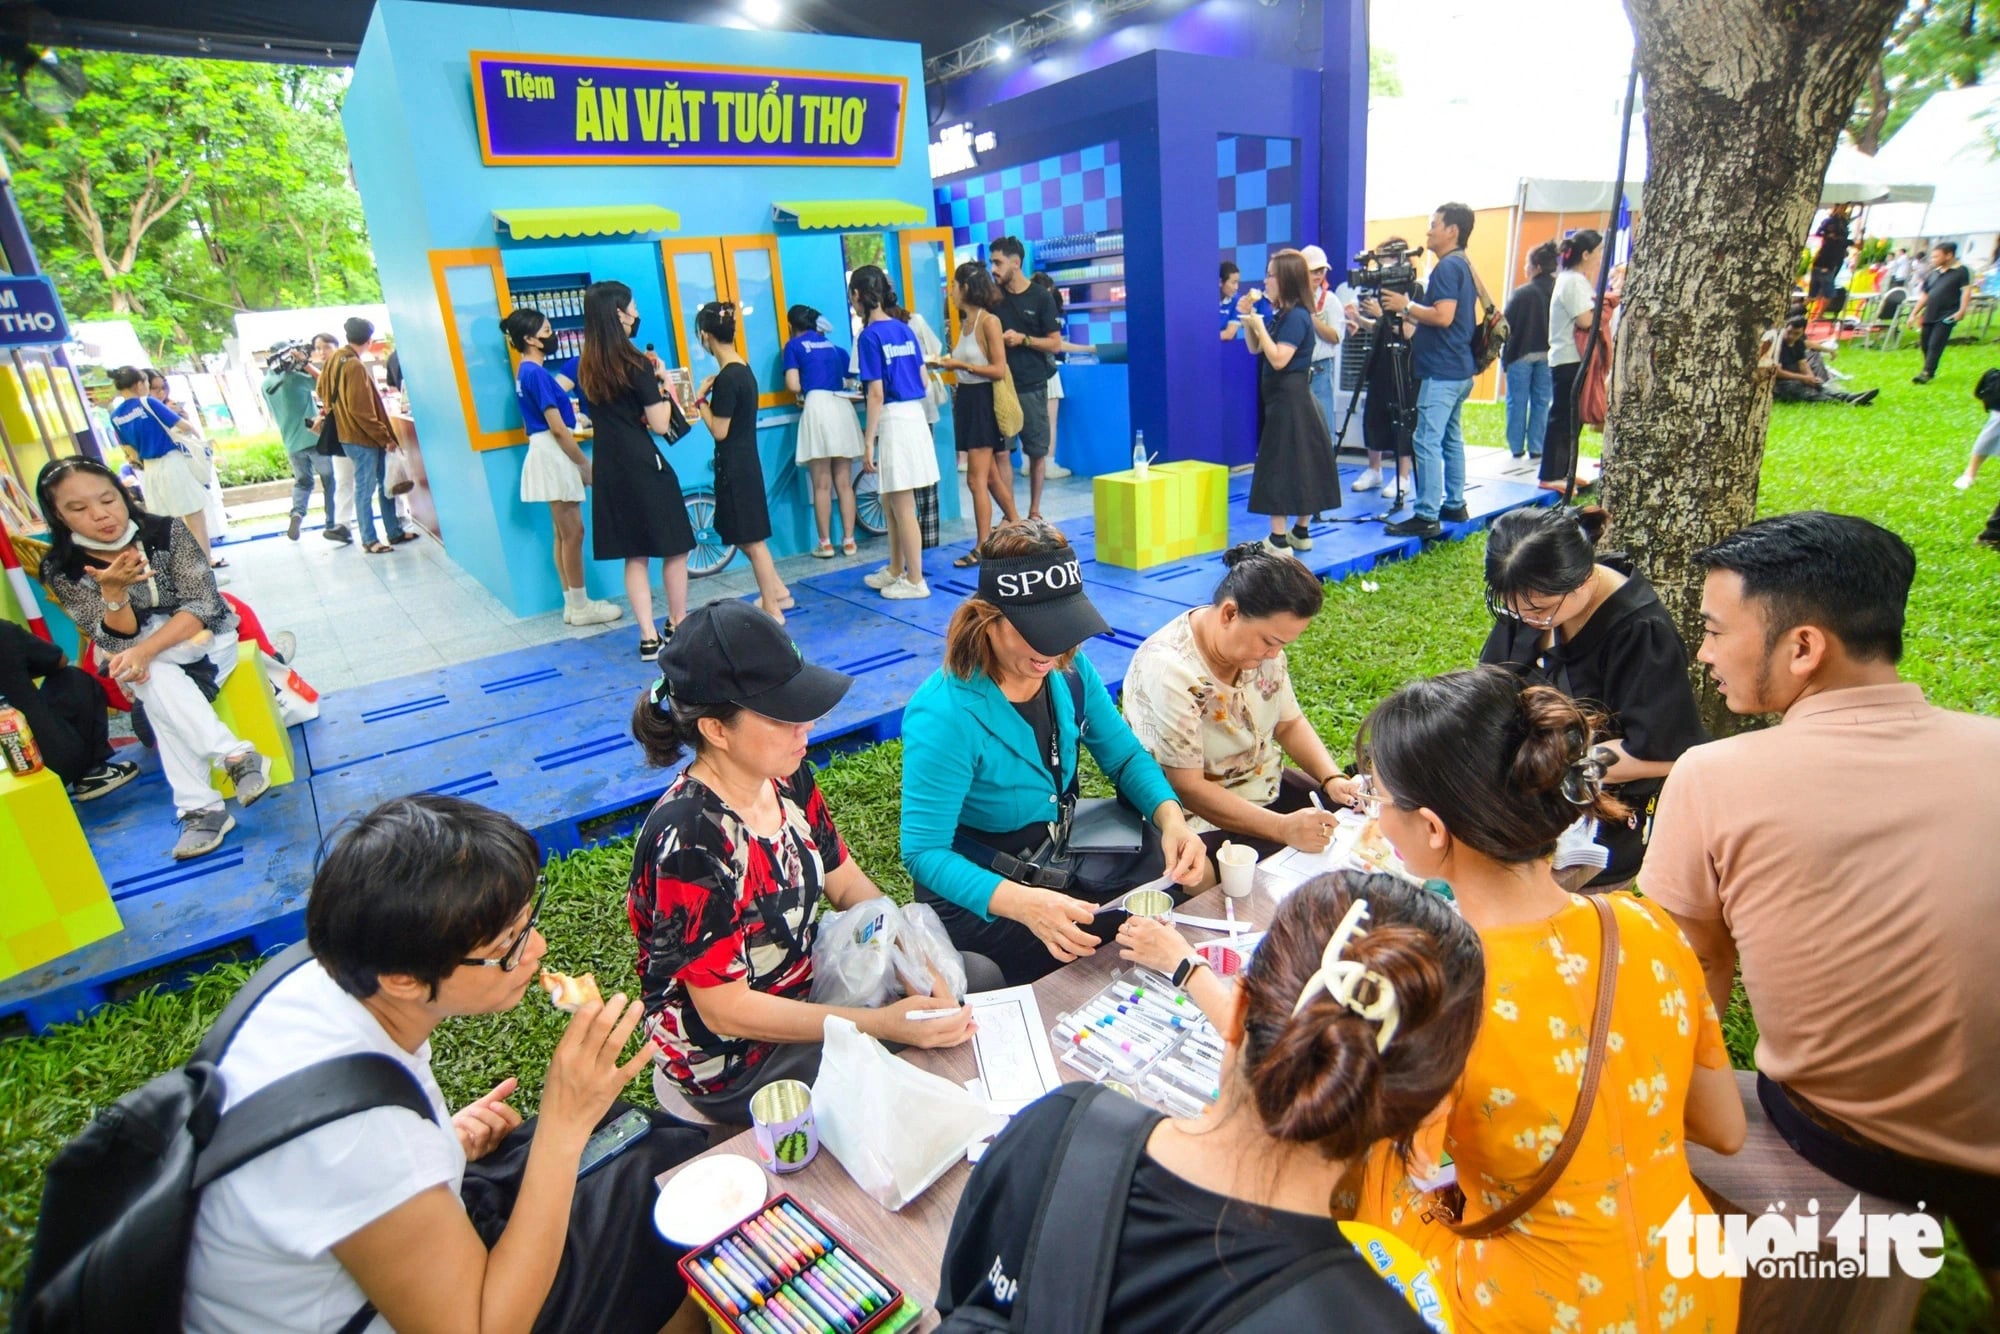 Visitors engage in folk games at the Vietnam Banh Mi Festival at Le Van Tam Park in District 1, Ho Chi Minh City on May 17. Photo: Quang Dinh / Tuoi Tre